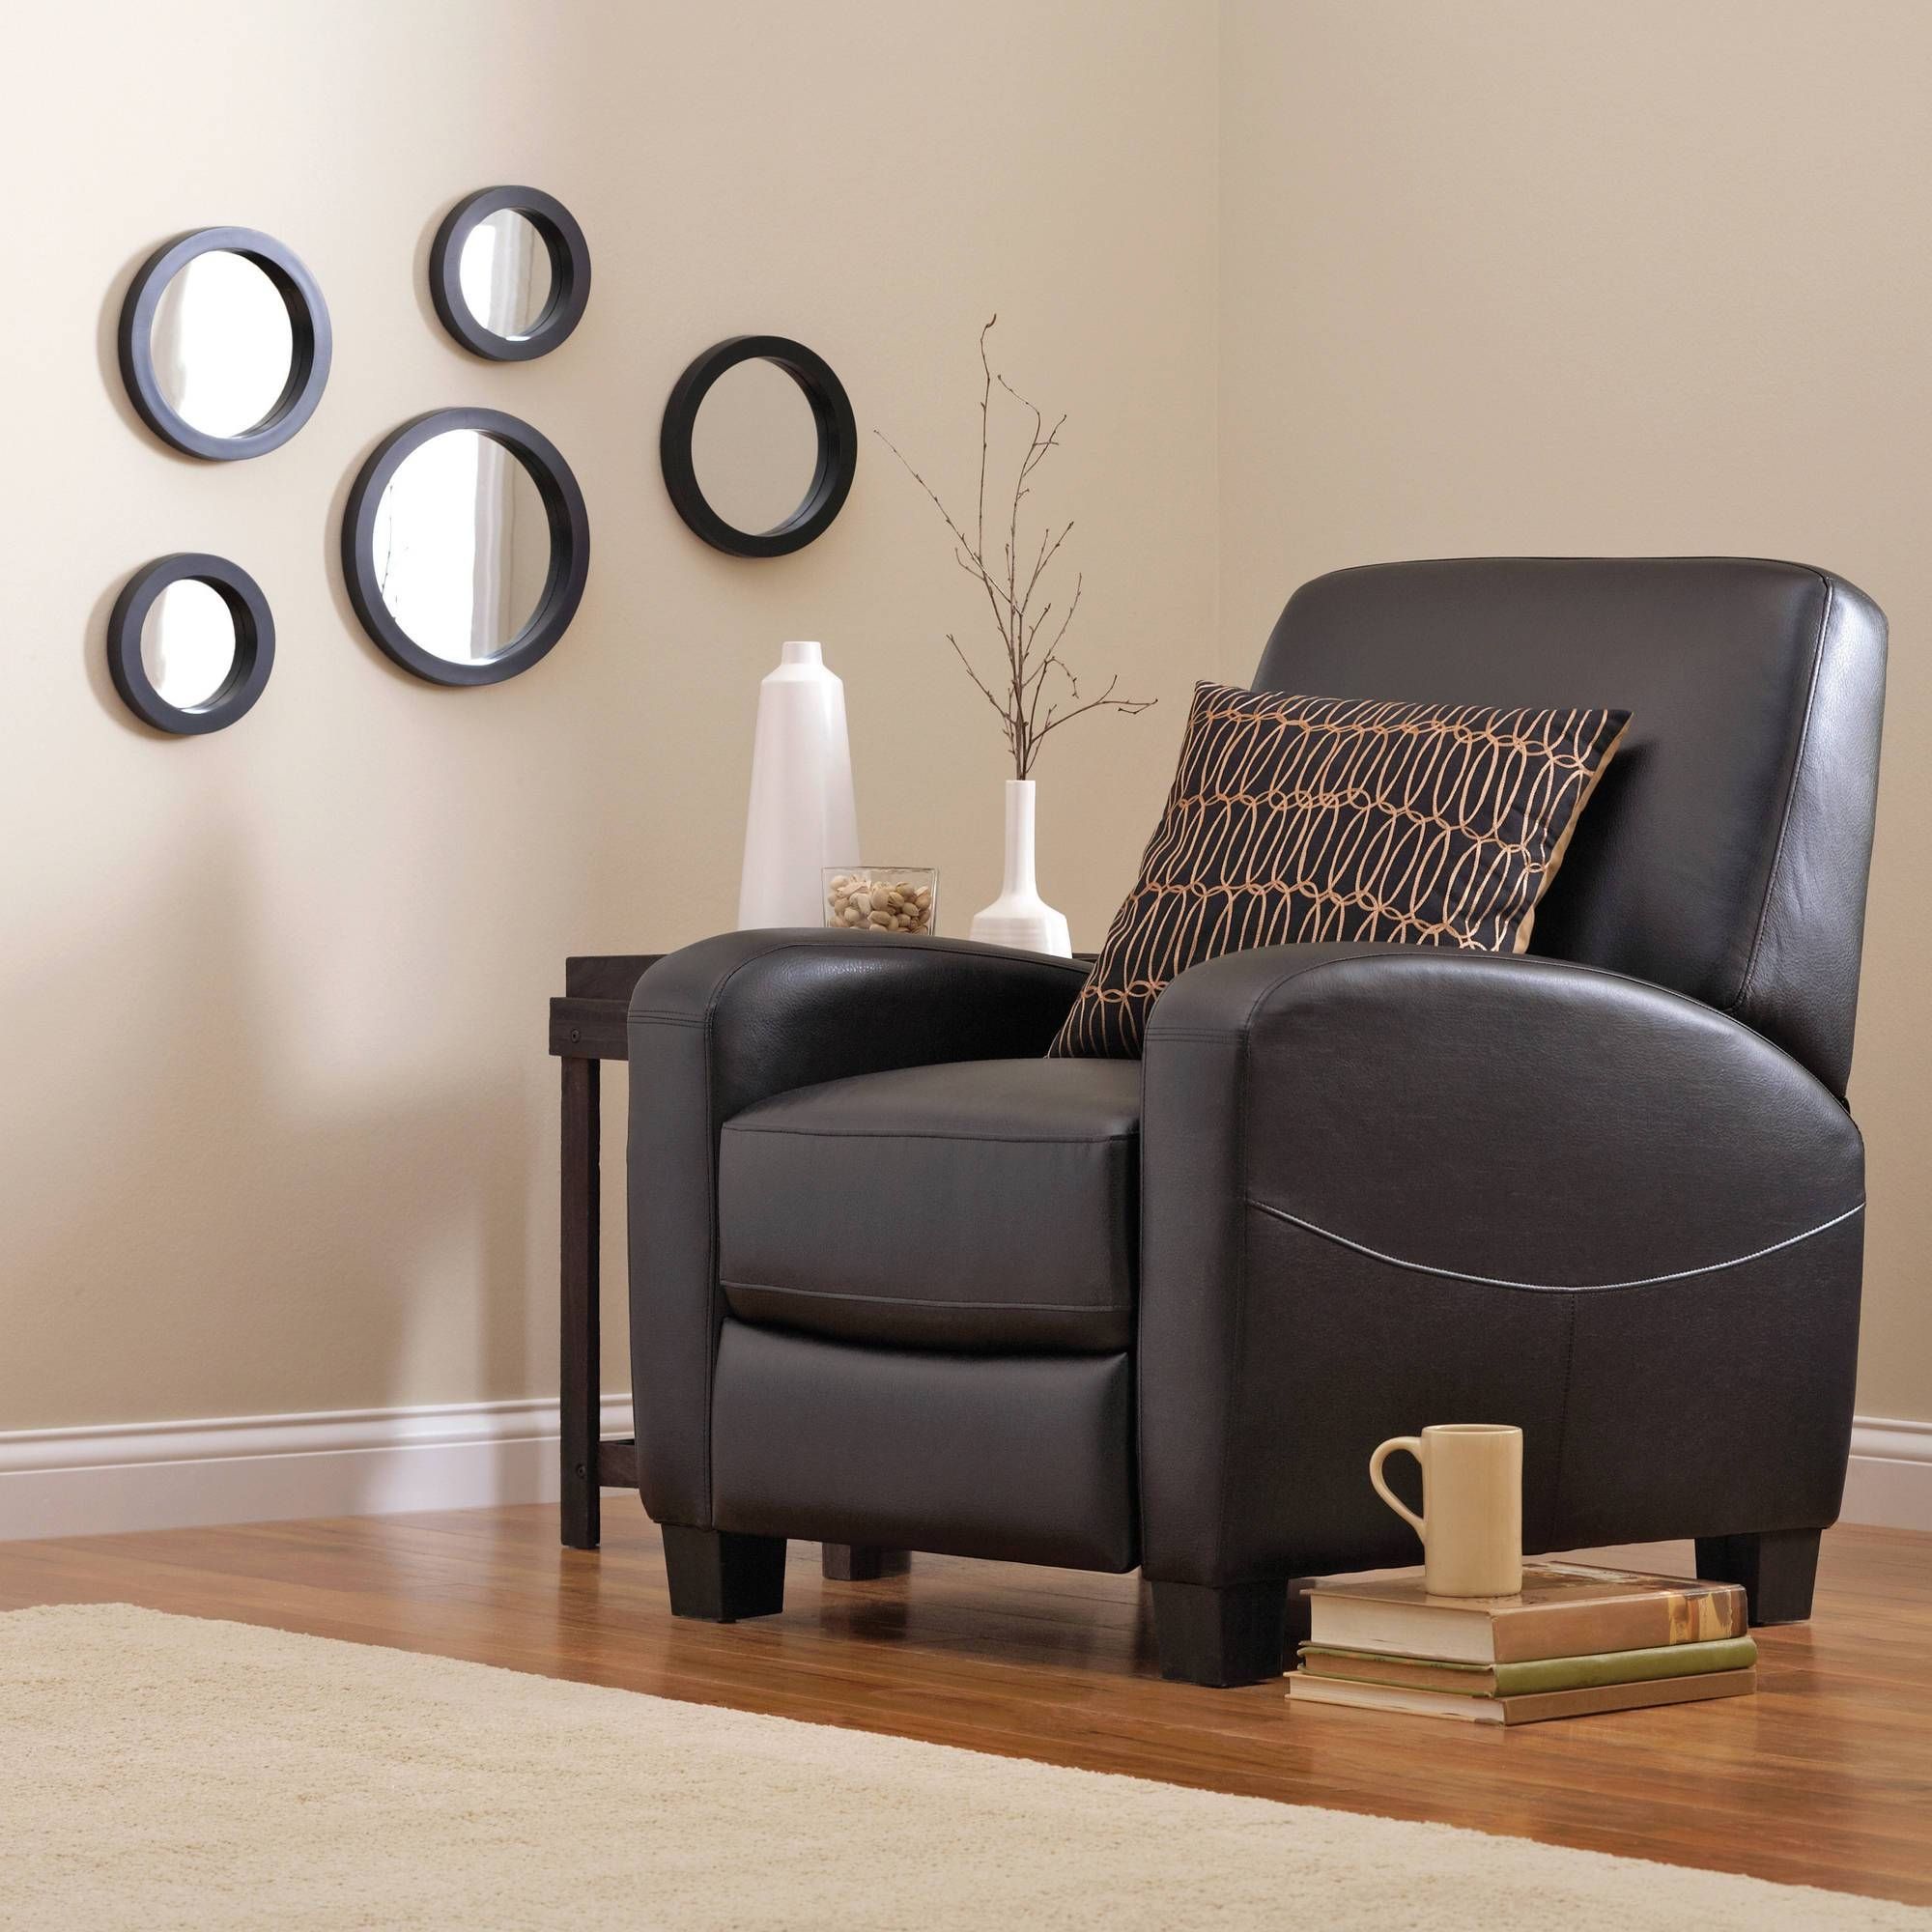 Mainstays 5 Piece Mirror Set, Black – Walmart With Regard To Mirrors Circles For Walls (View 14 of 15)